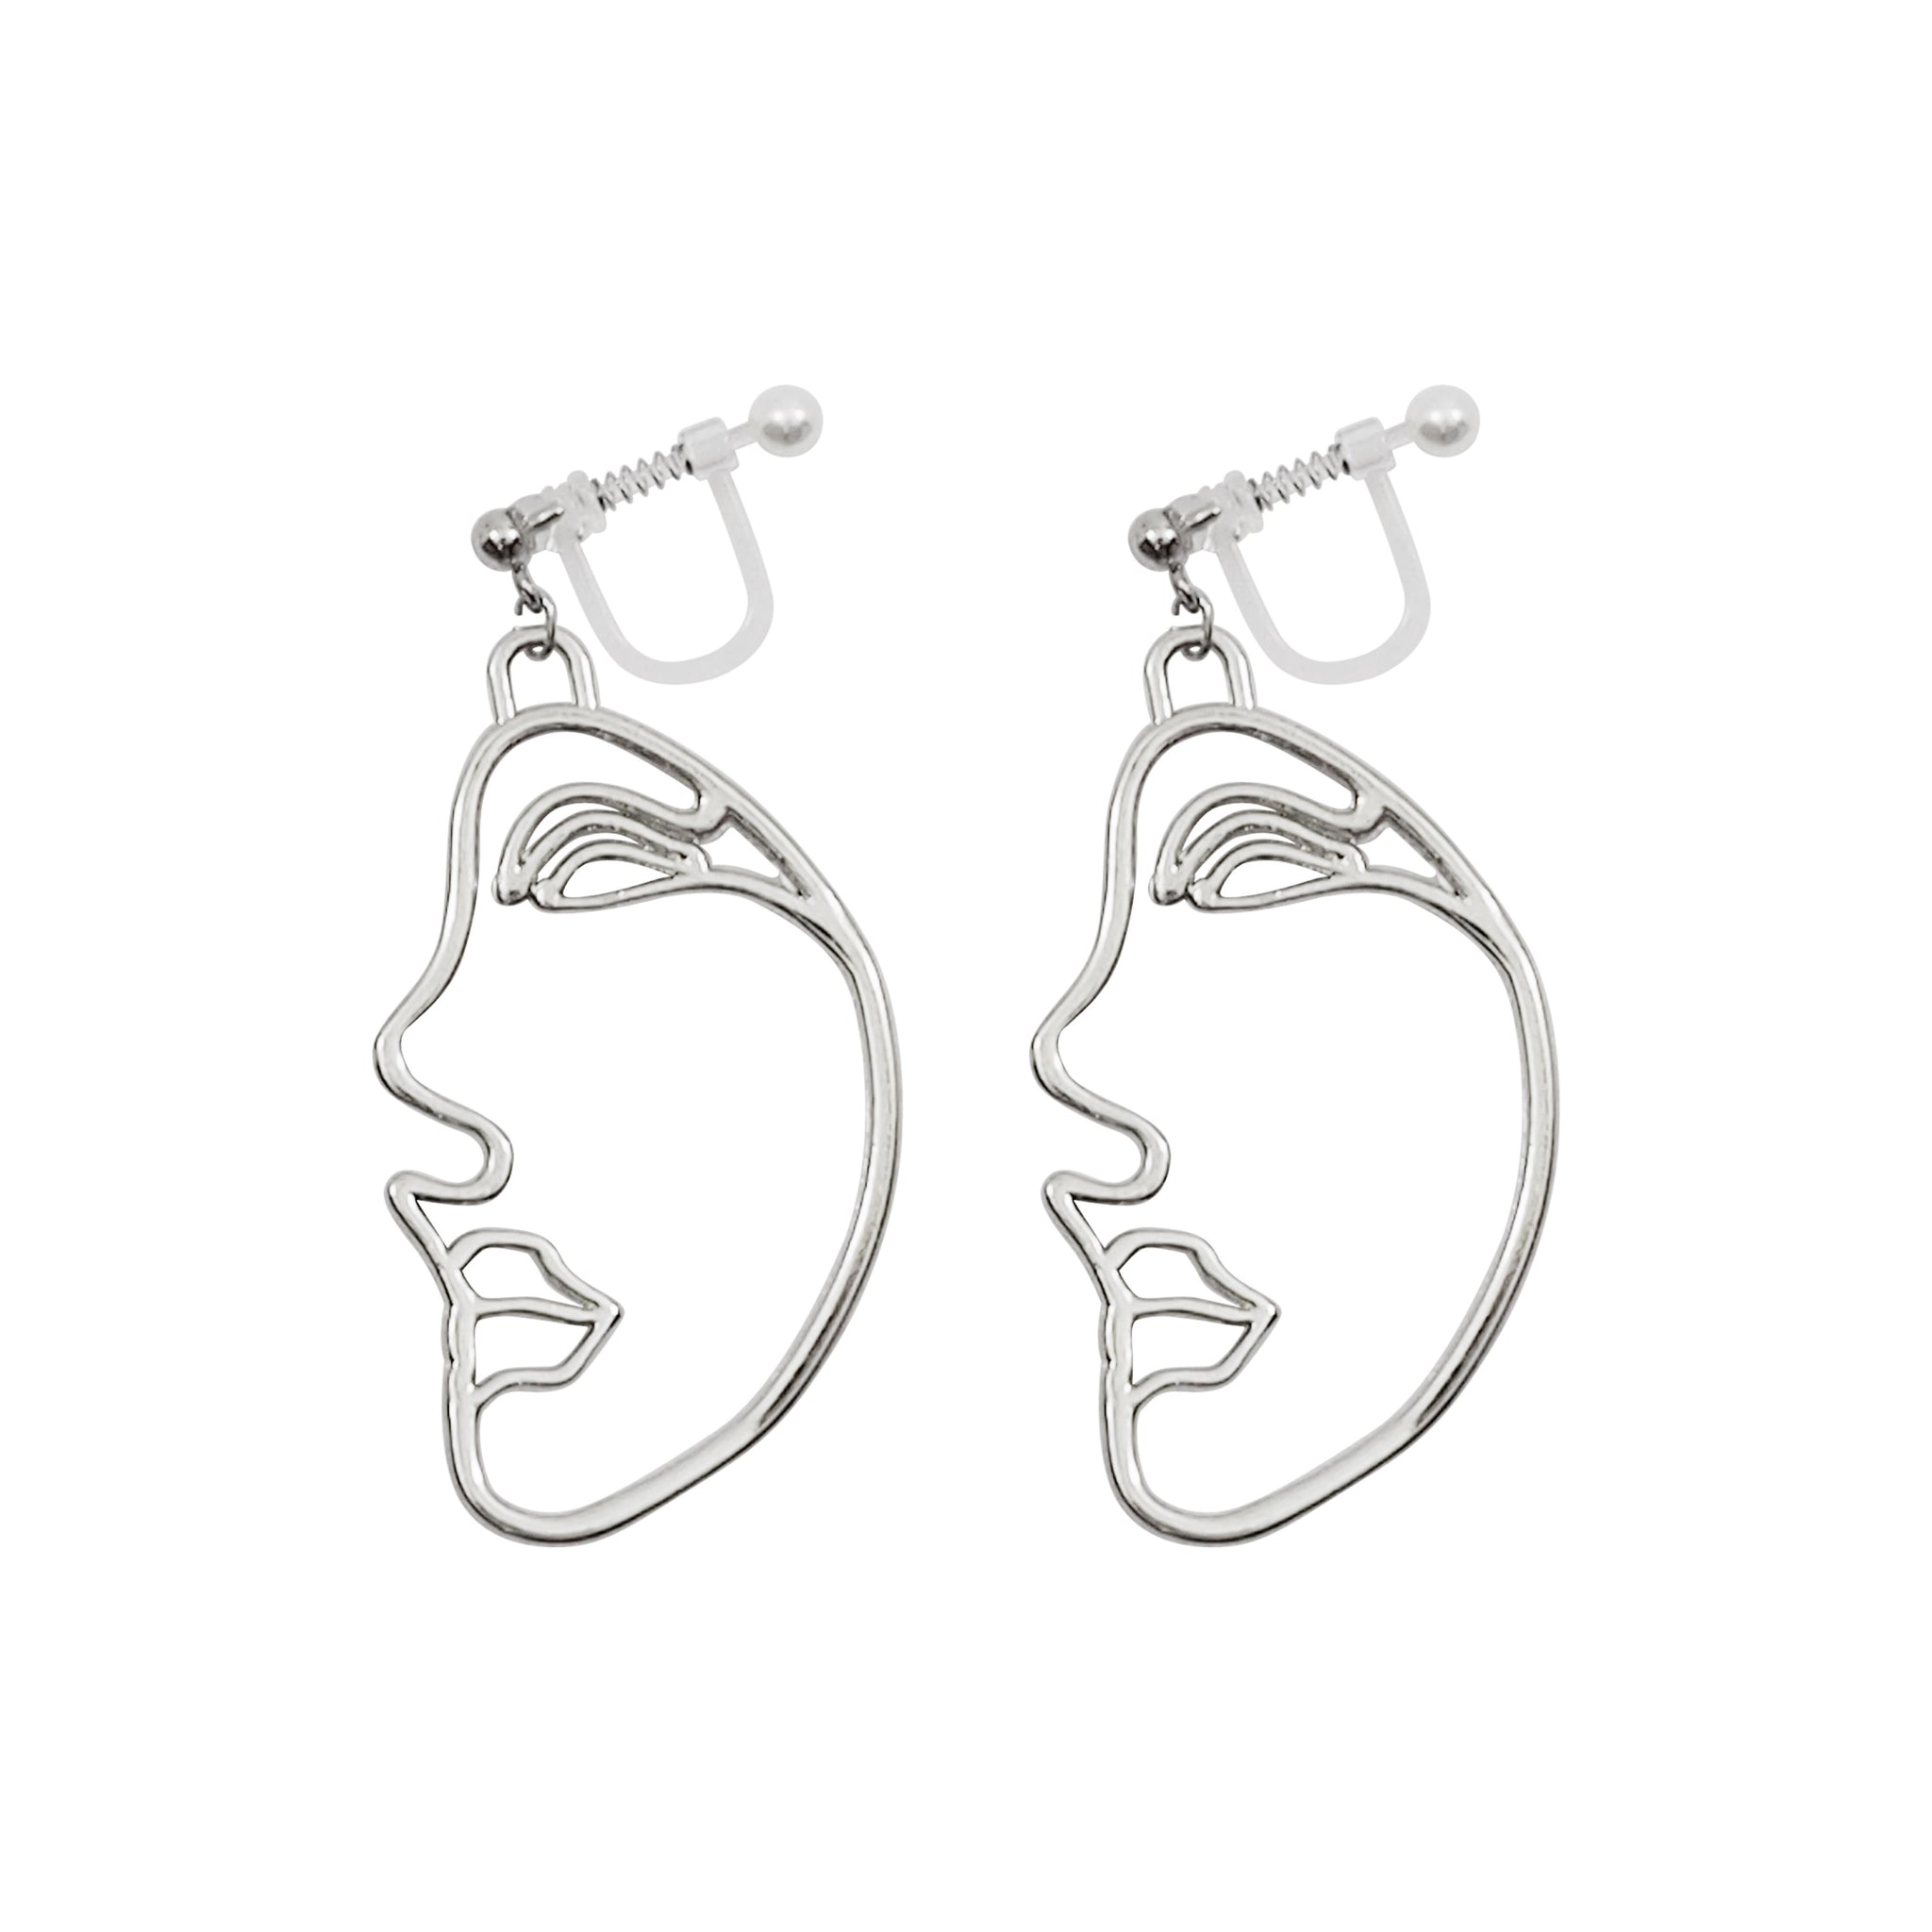 Earrings – Not Picasso